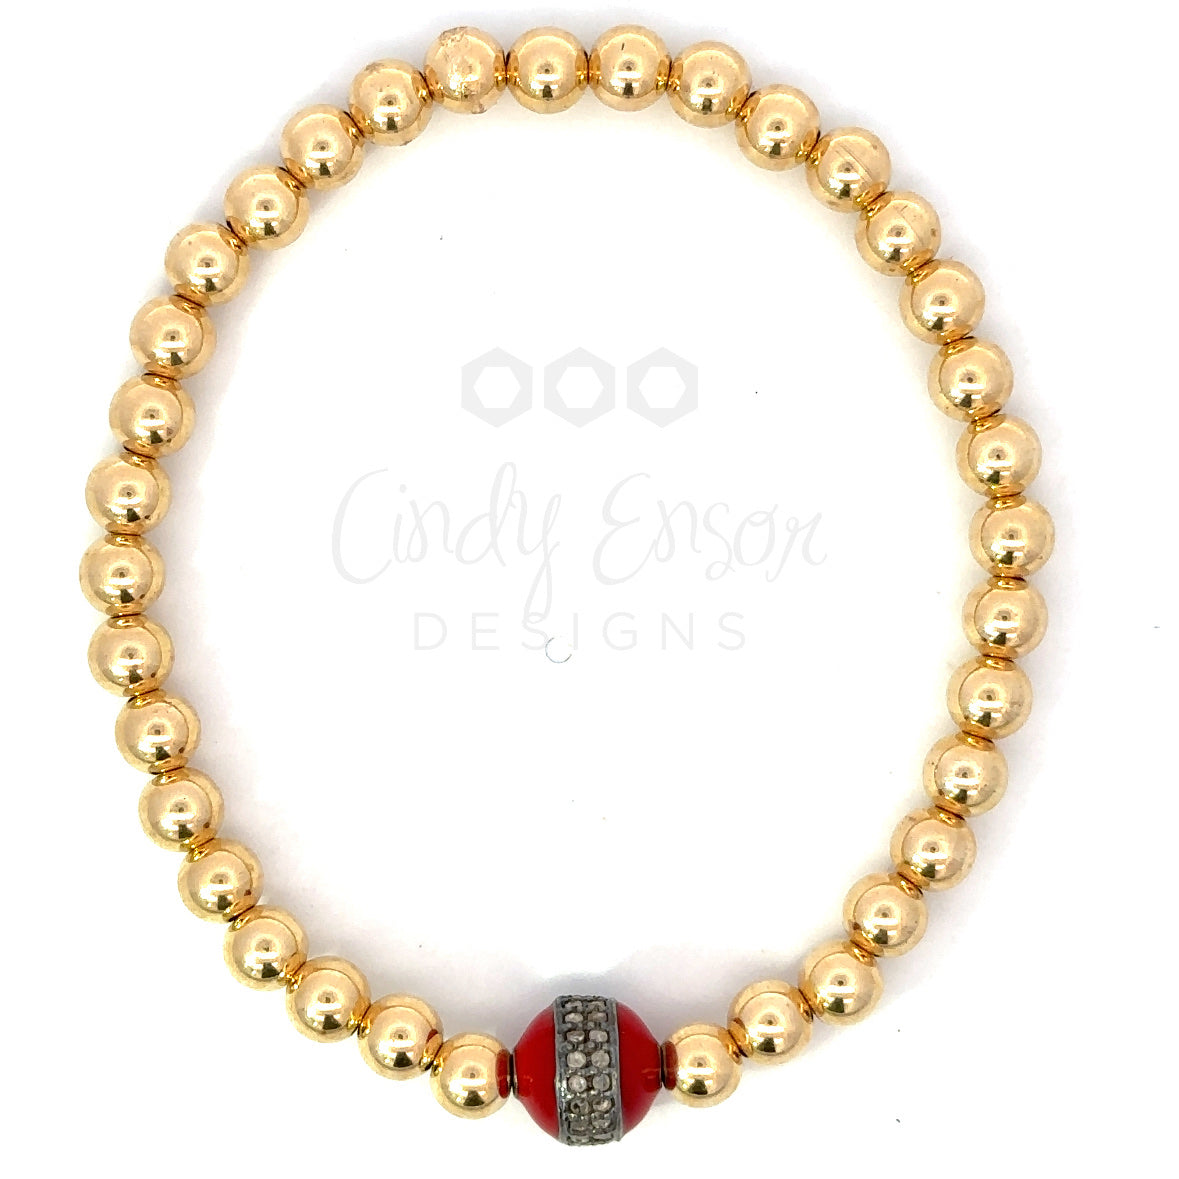 5mm Yellow Gold Filled Bead Bracelet with 8mm Pave Enamel Bead